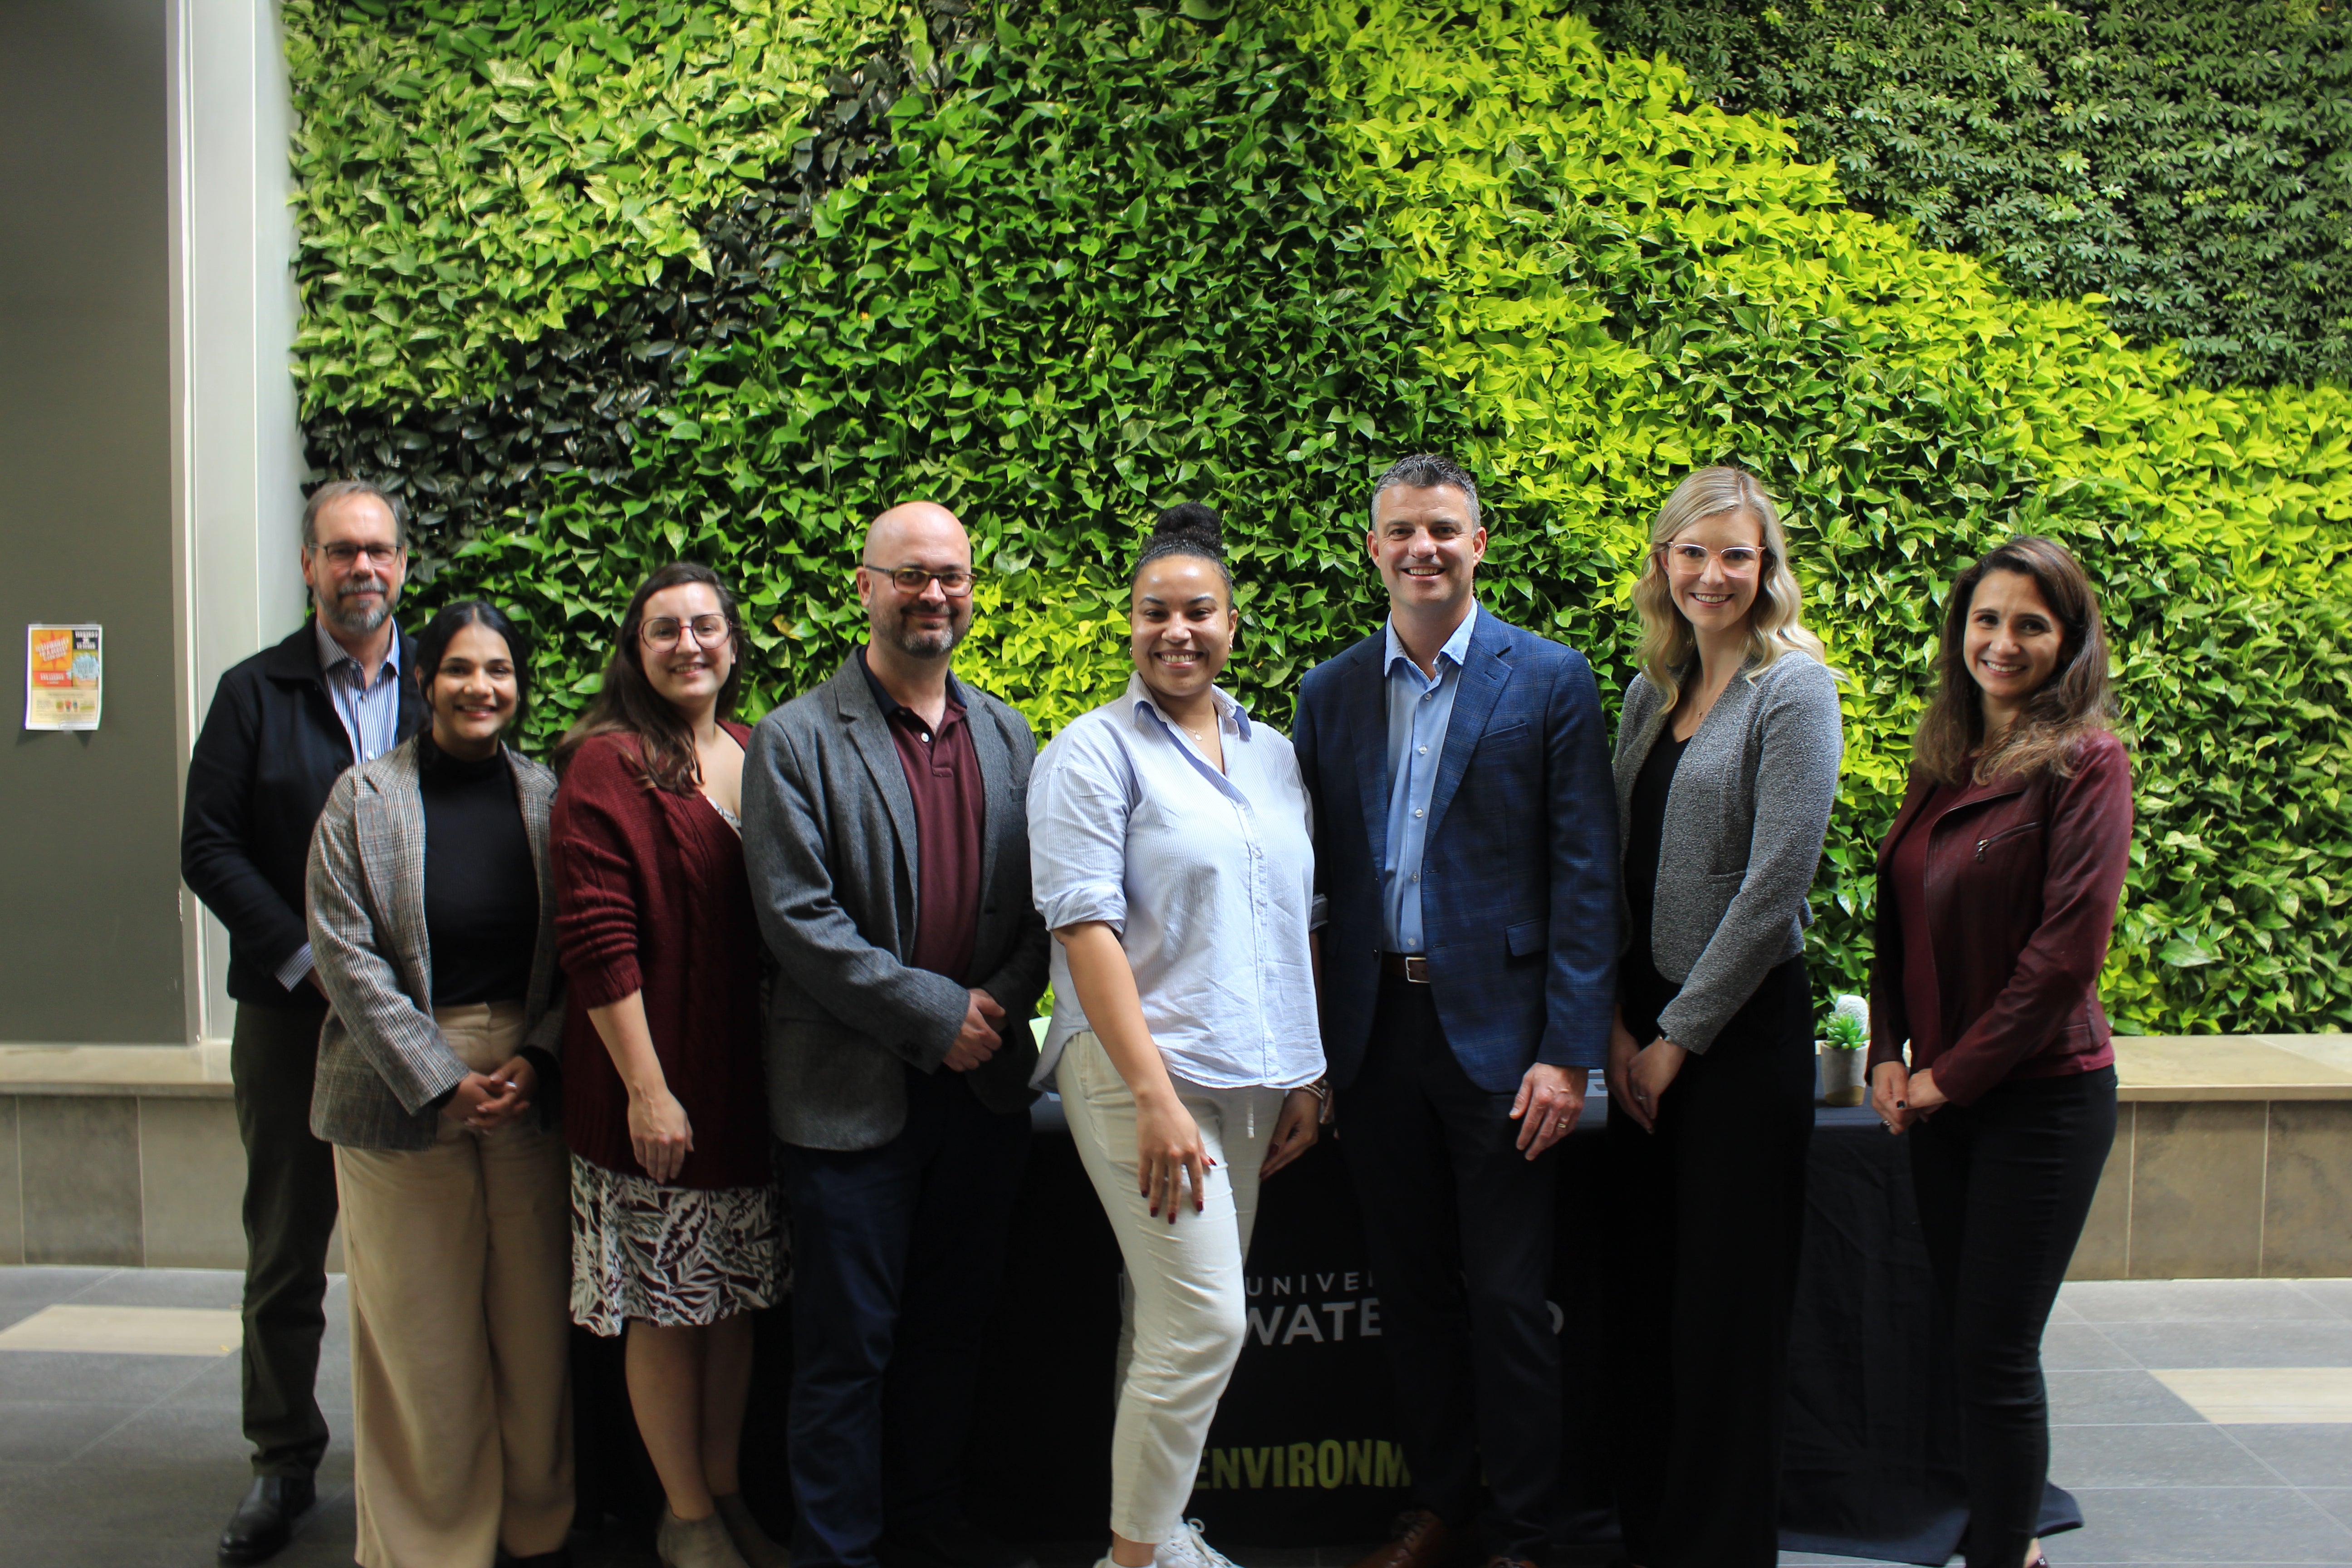 Libro Credit Union, University of Waterloo, and House of Friendship staff pose in front of the Environment 3 green wall